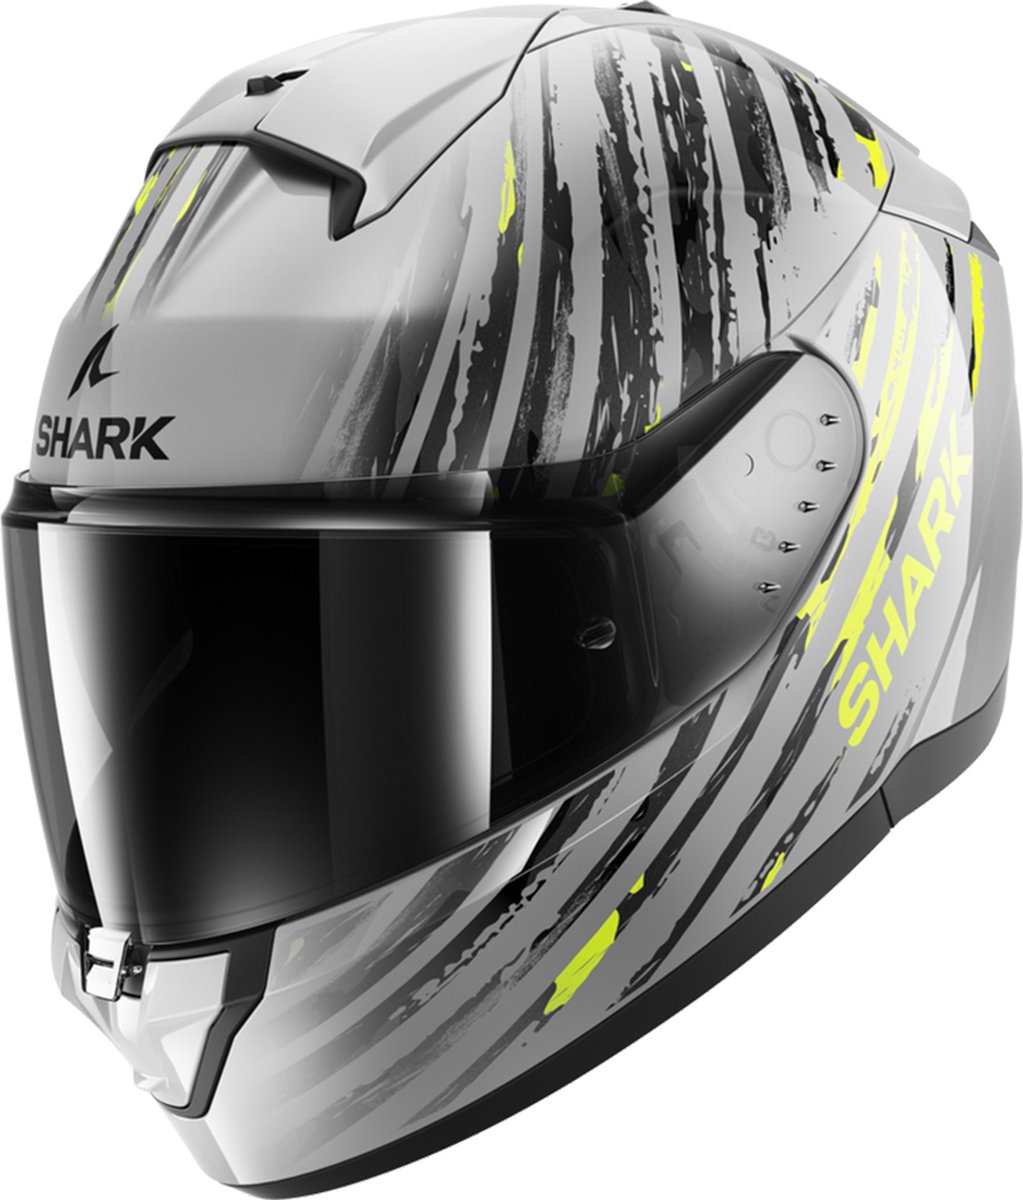 Shark Ridill 2 Assya Silver Anthracite Yellow SAY M - Maat M - Helm